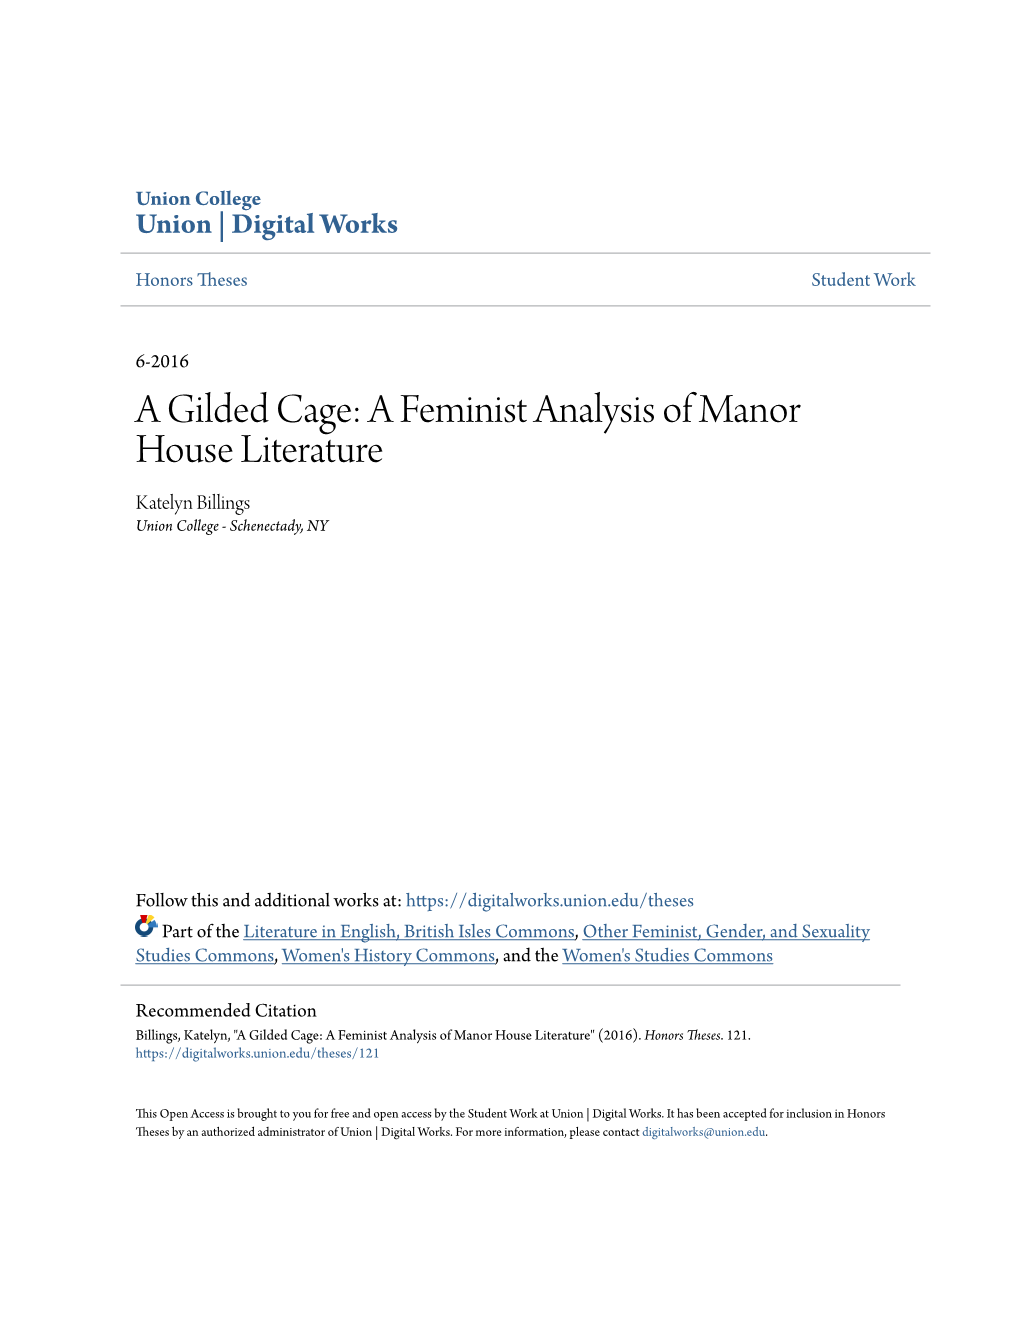 A Gilded Cage: a Feminist Analysis of Manor House Literature Katelyn Billings Union College - Schenectady, NY